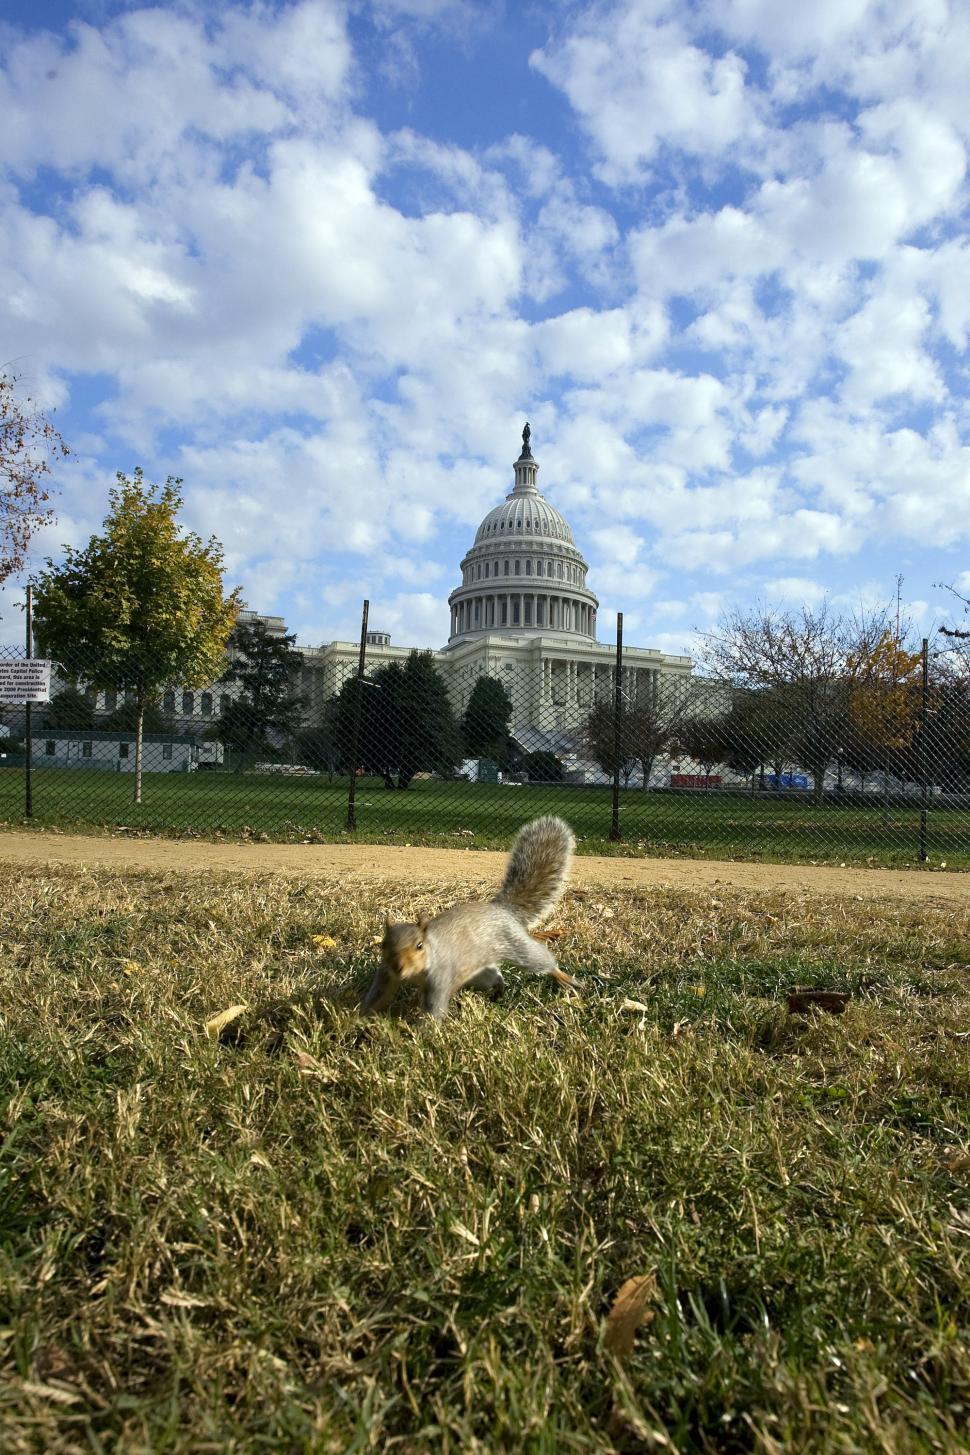 Free Image of Squirrel at US Capitol 